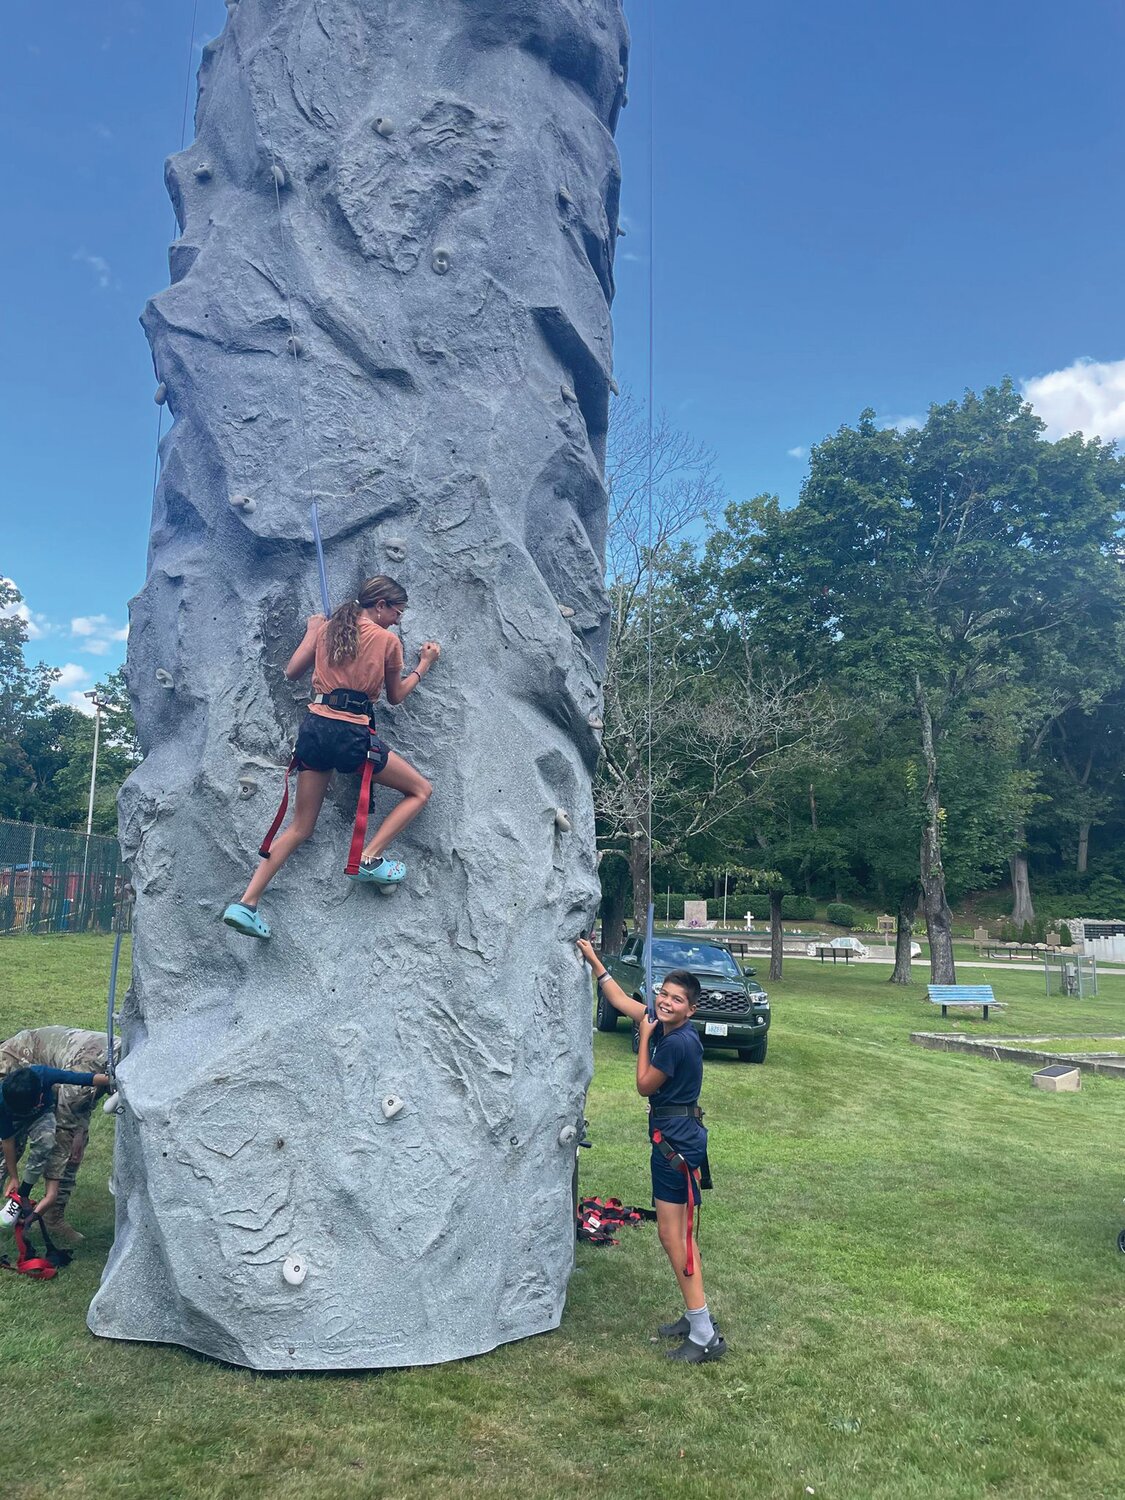 STEEP CLIMB: Victoria Andreozzi and Anthony Vieira weren’t afraid to tackle the climbing wall provided by the Rhode Island National Guard.